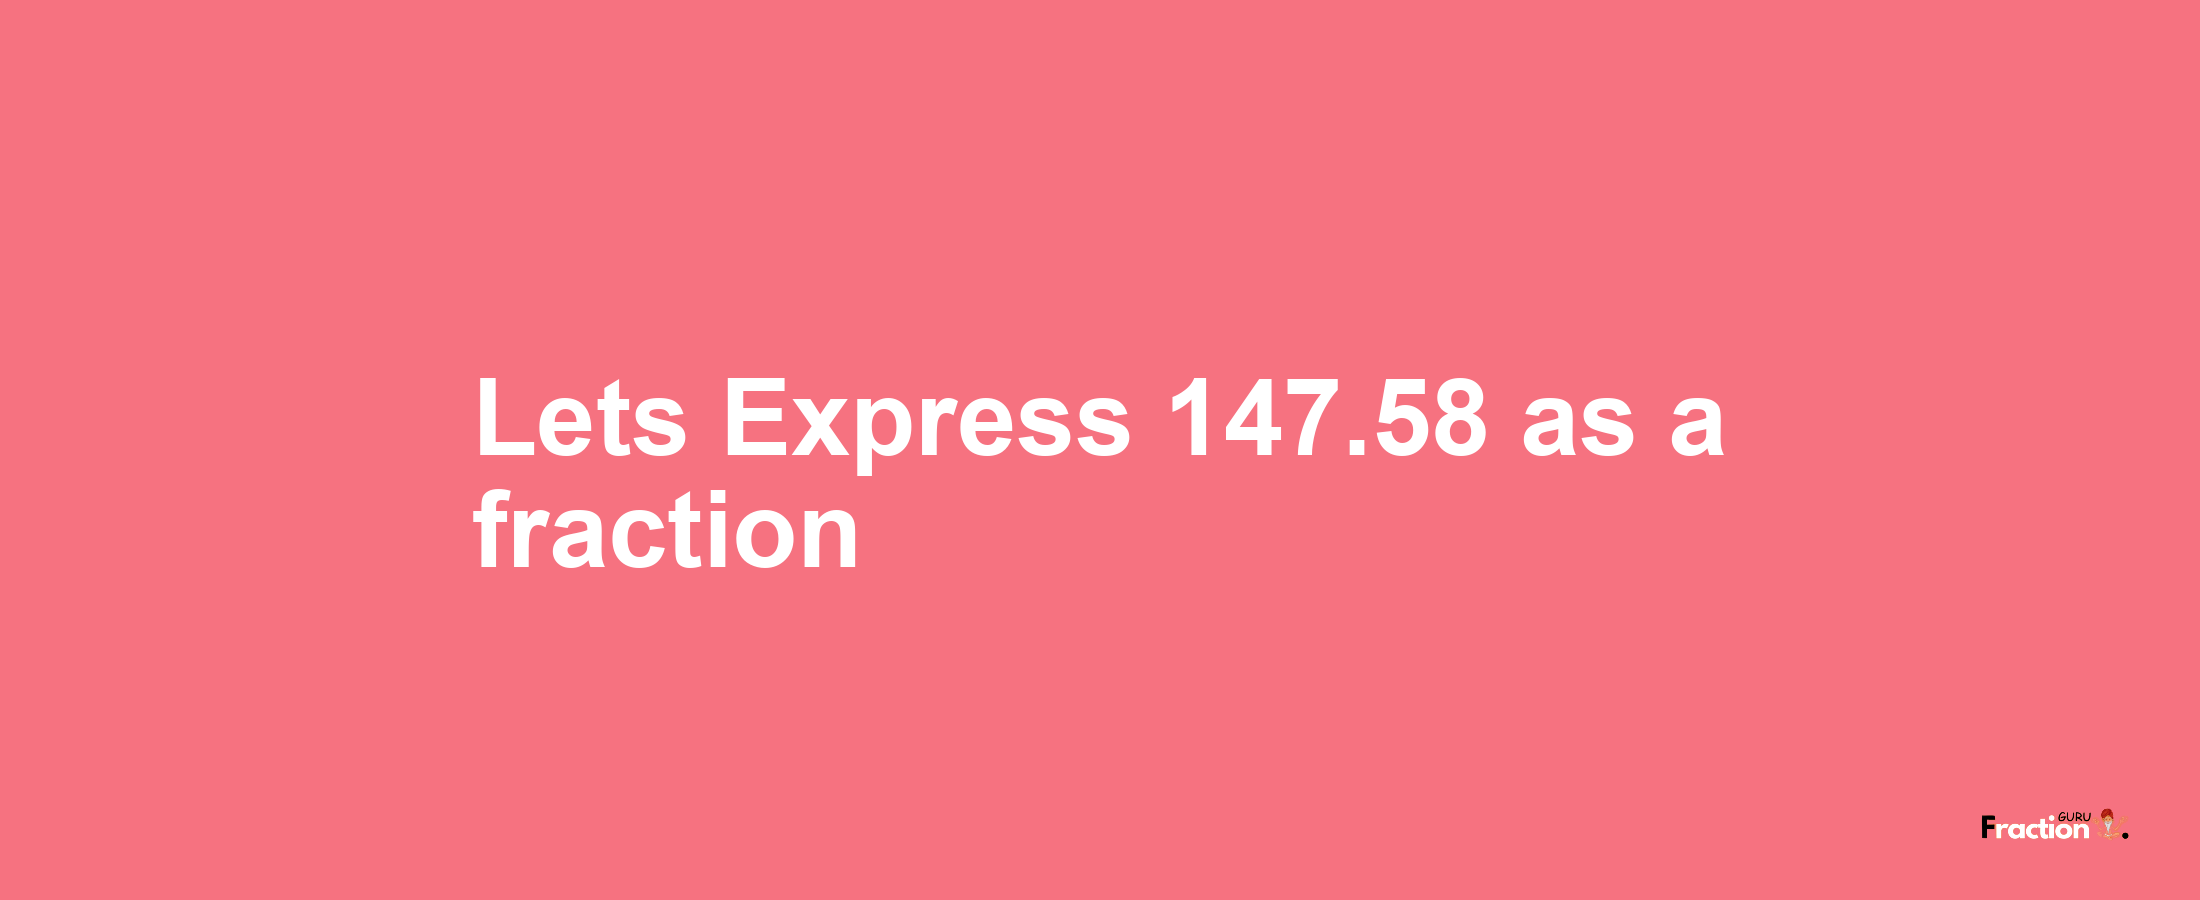 Lets Express 147.58 as afraction